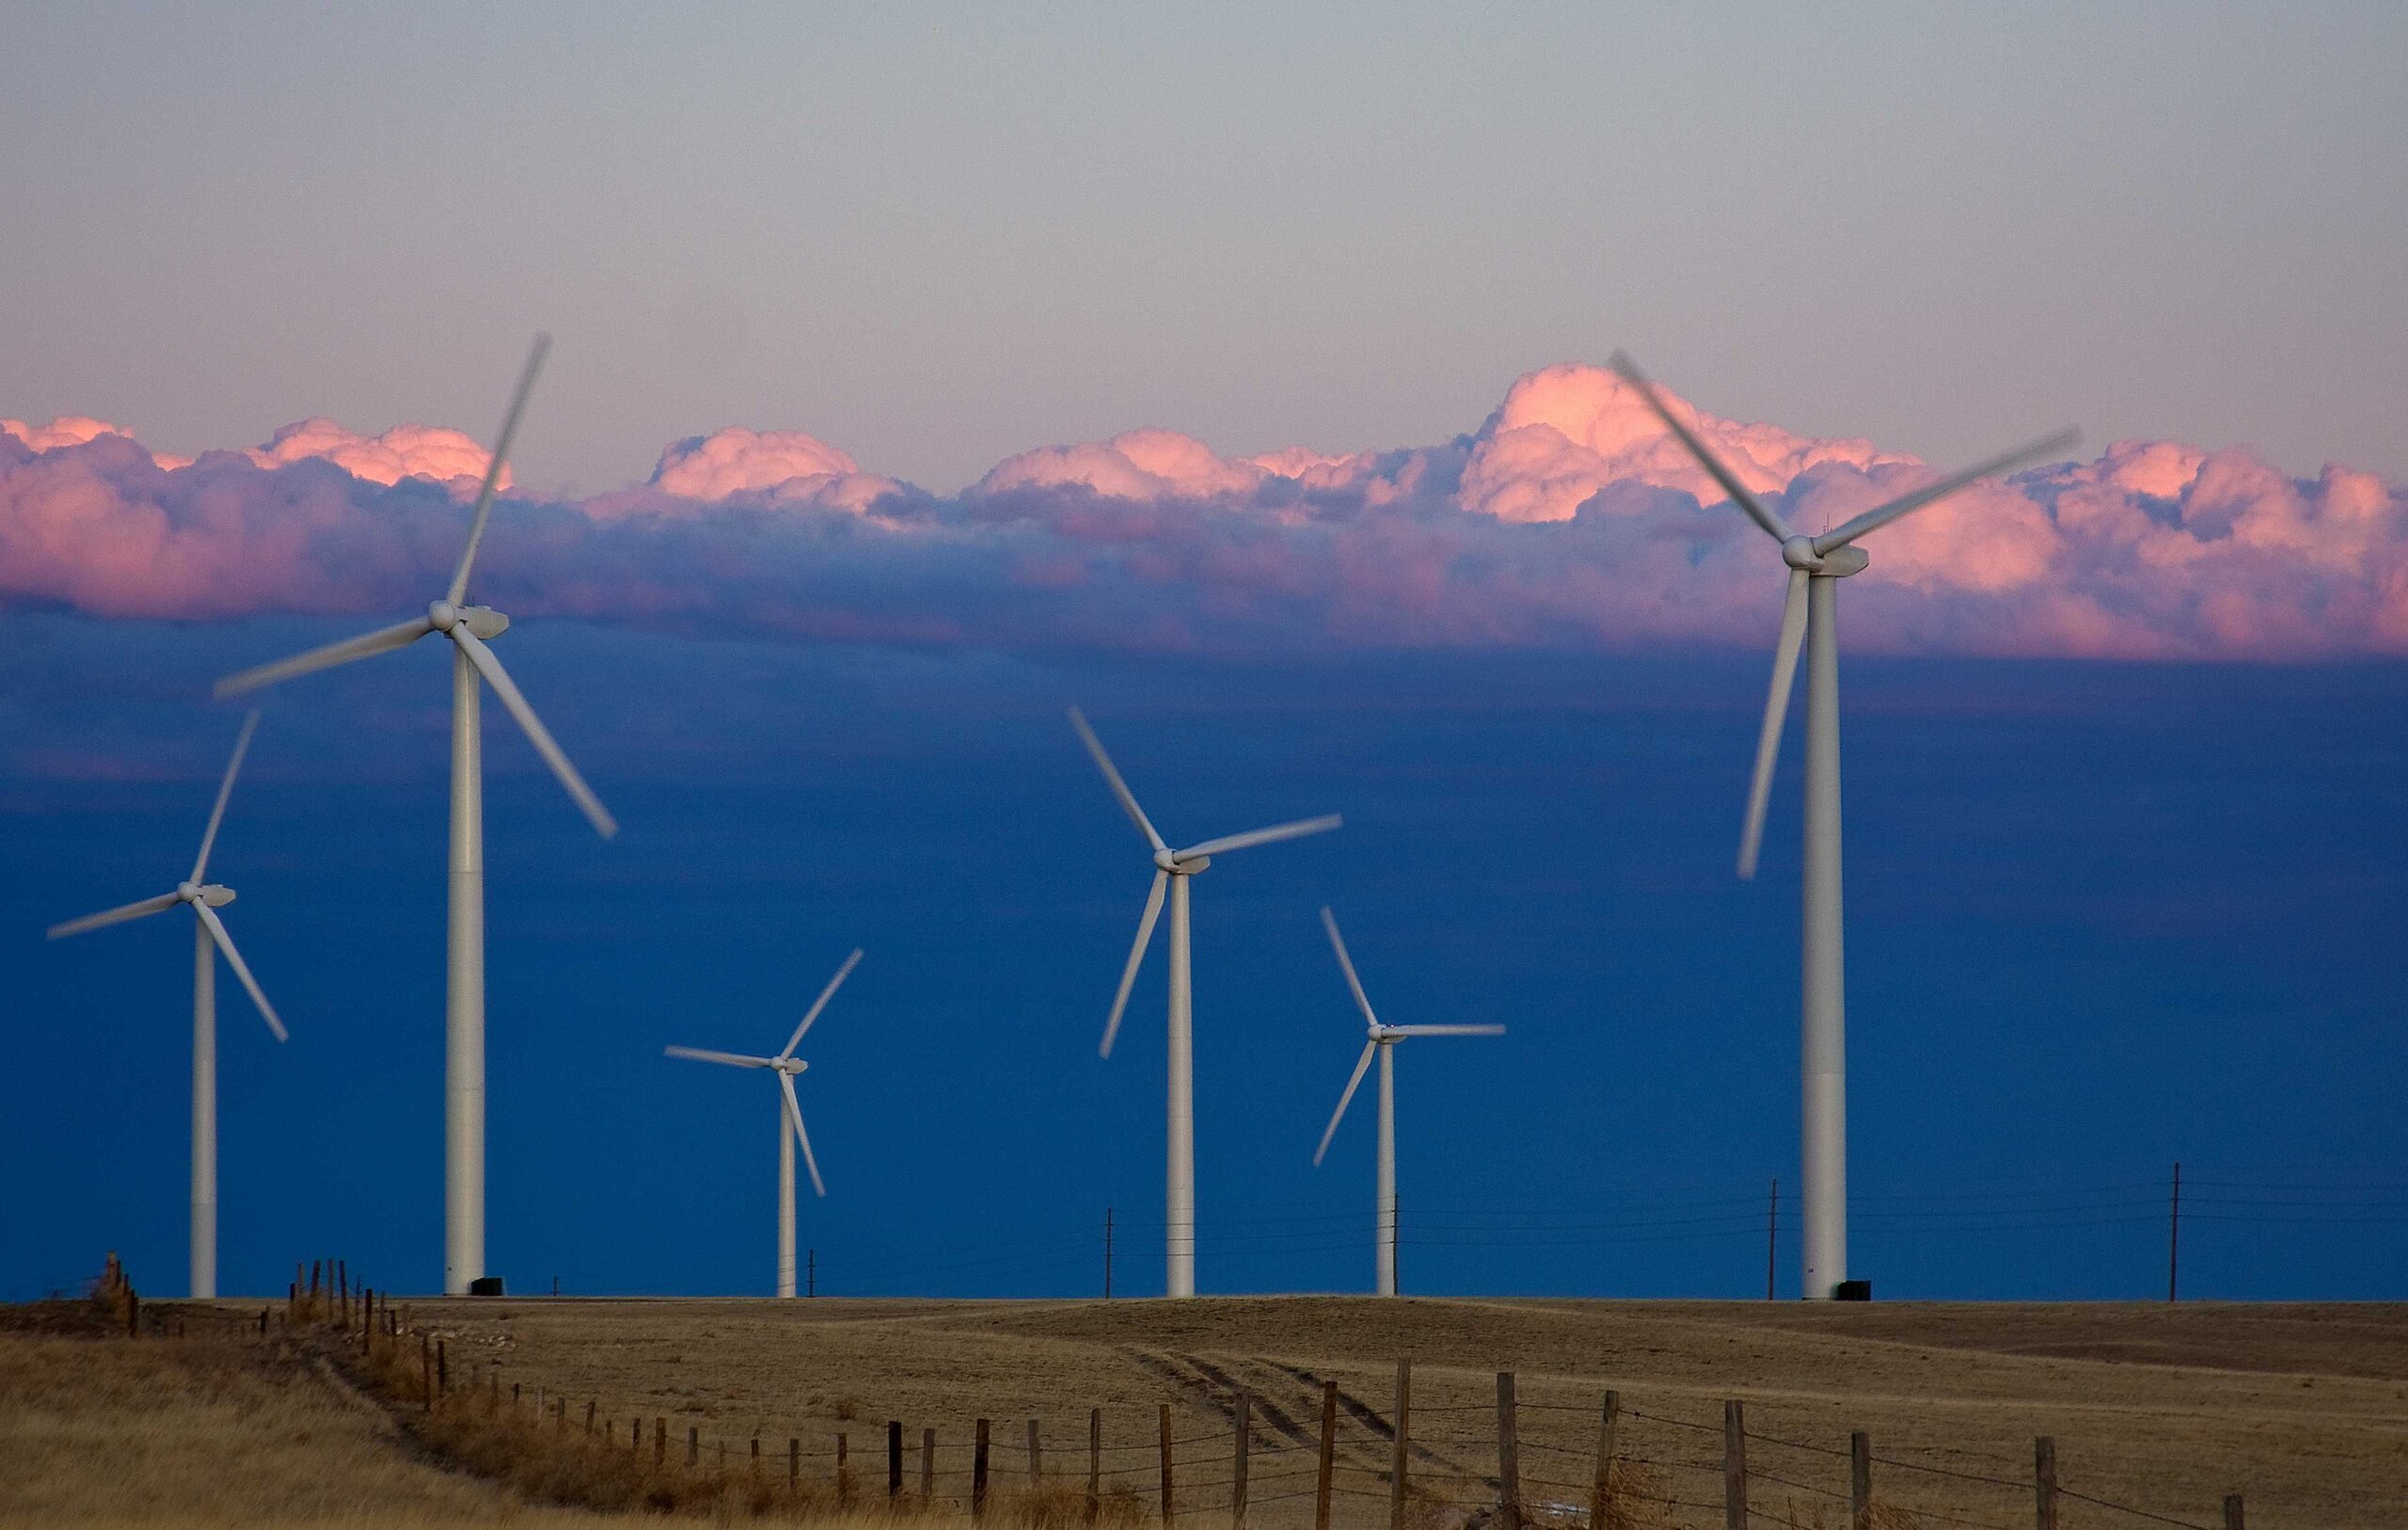 Photo of a windfarm in Colorado. The photo shows six large white wind turbines standing in a field, some in the foreground and some in the background. The sky is cloudy.